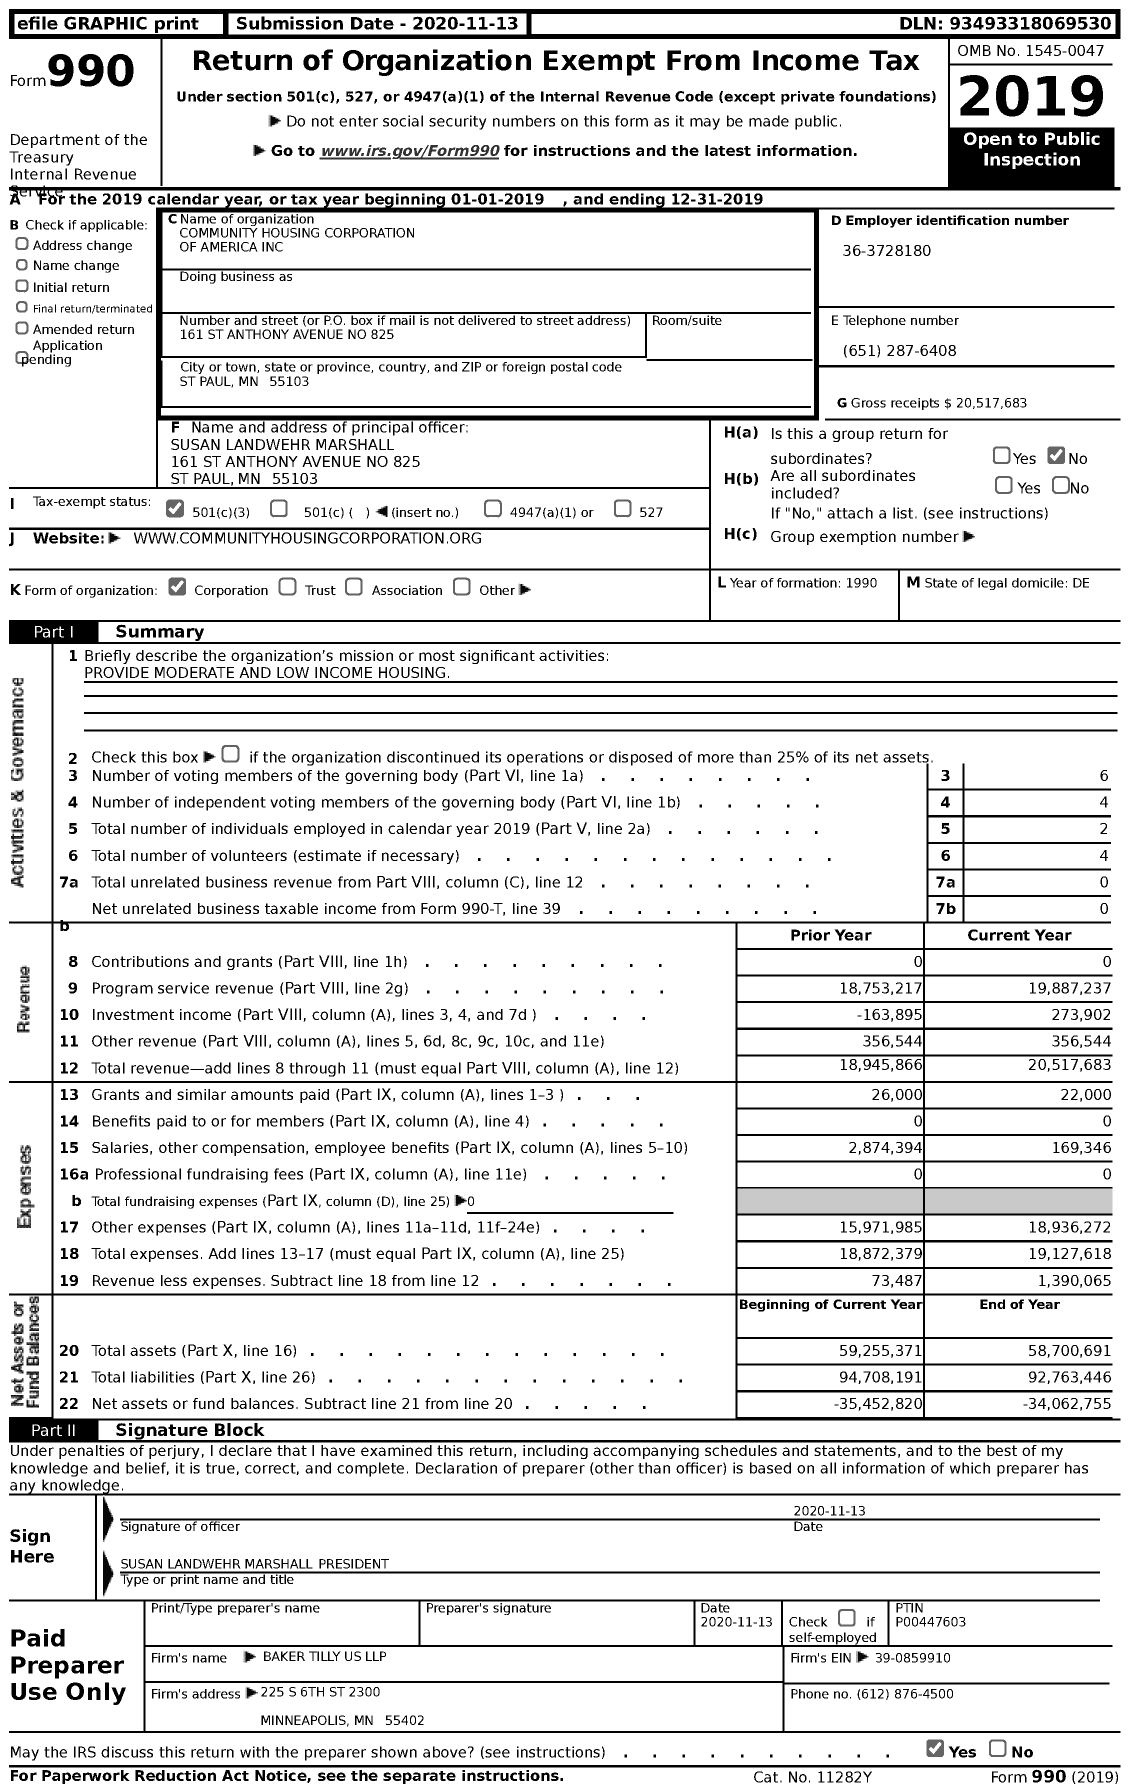 Image of first page of 2019 Form 990 for Community Housing Corporation of America (CHC)